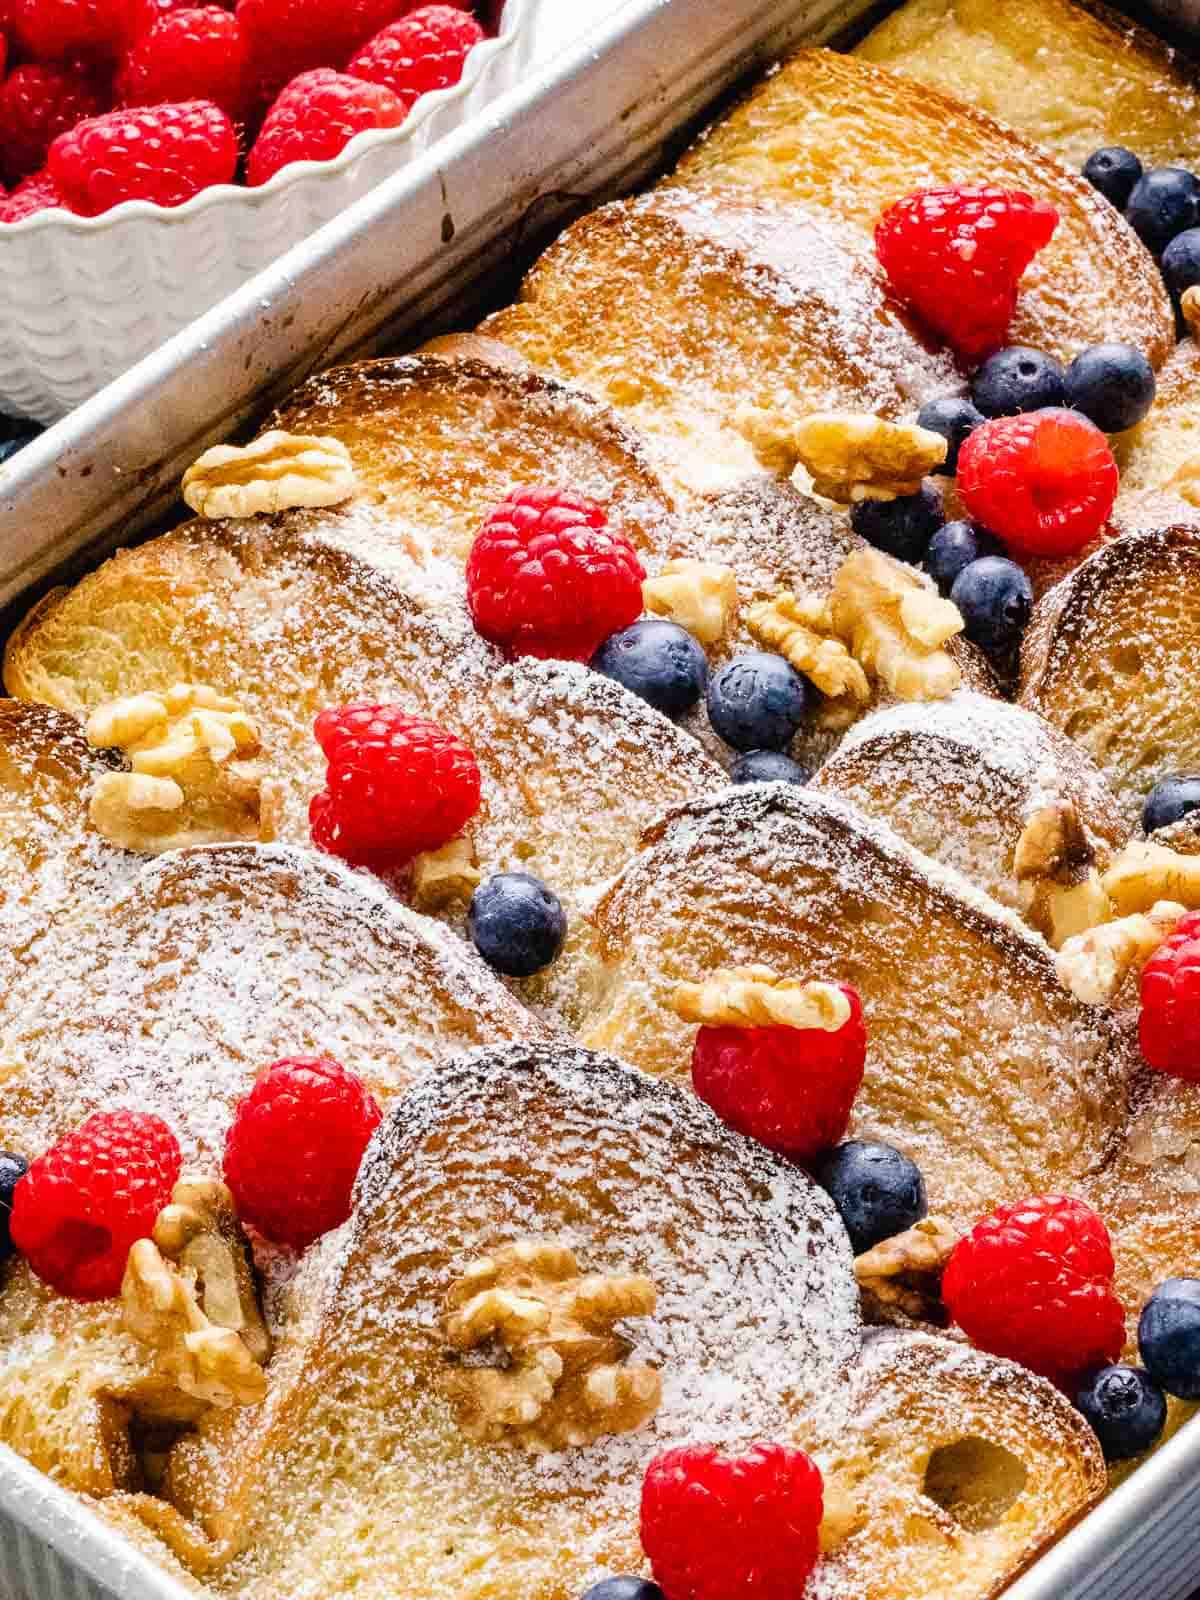 Baked French toast casserole with raspberries, blueberries, powdered sugar, and walnuts on top